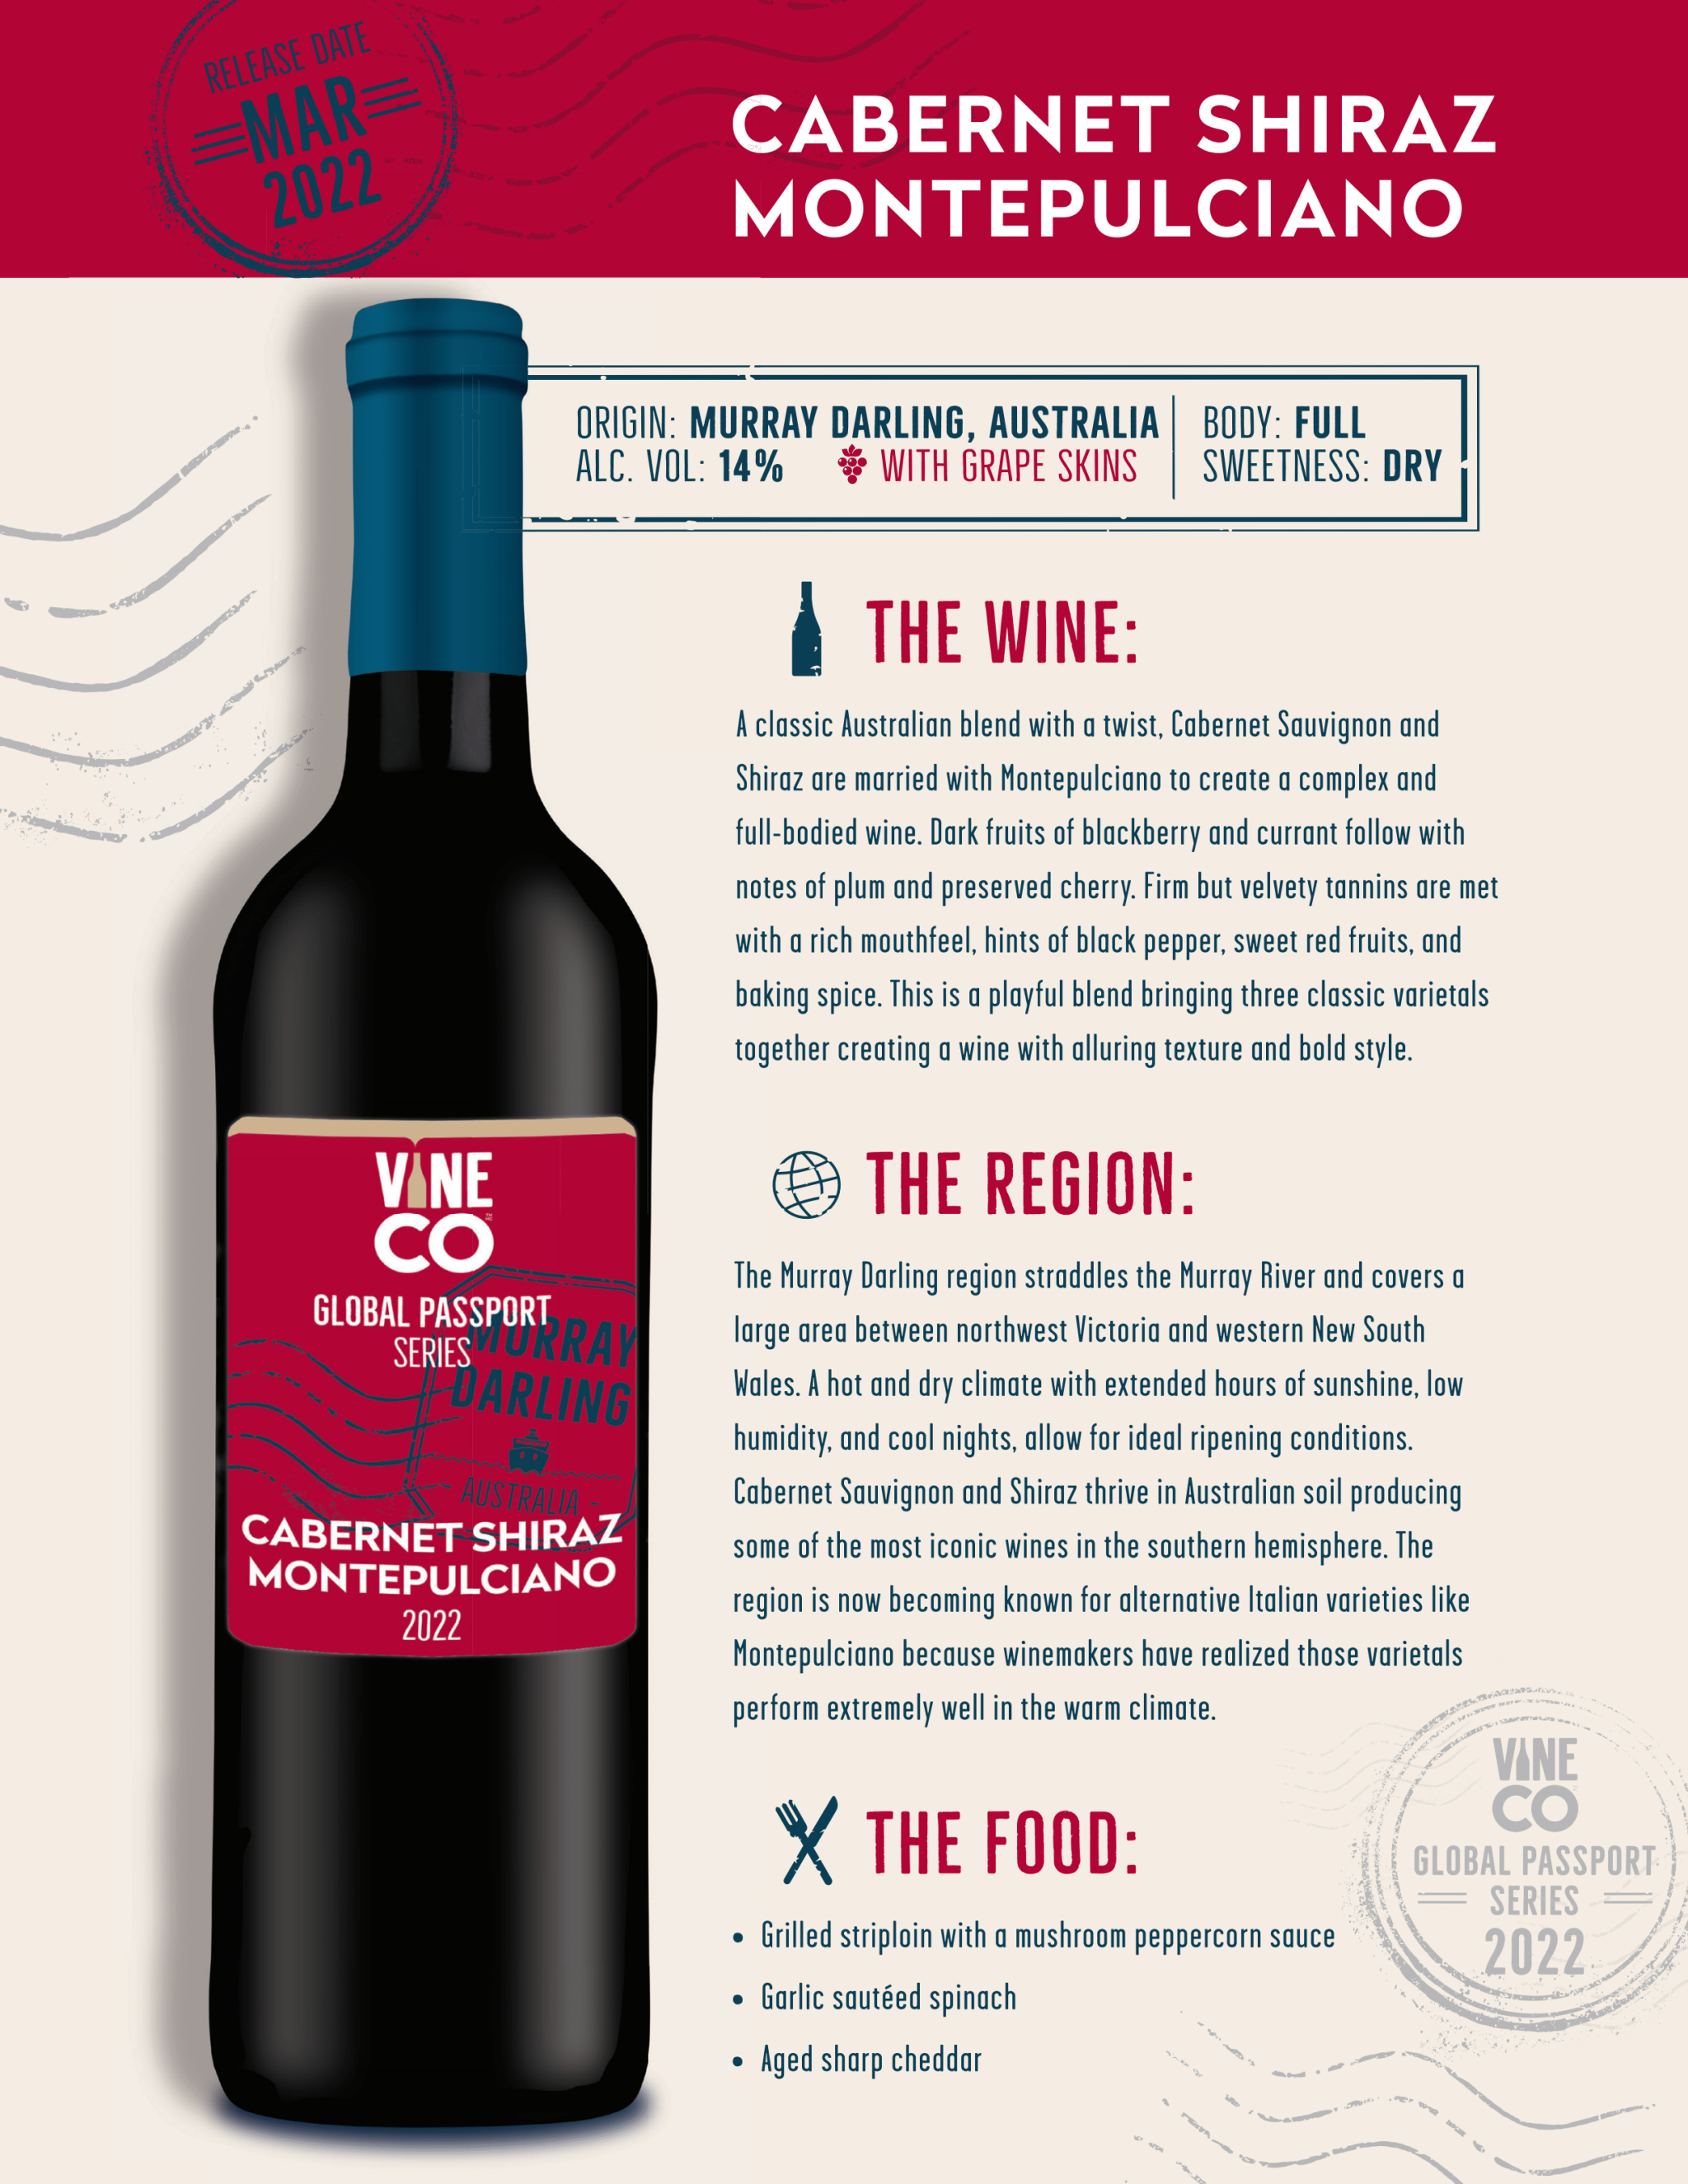 Vineco Global Passport Series - By reservation only - Cabernet Shiraz Montelpulciano